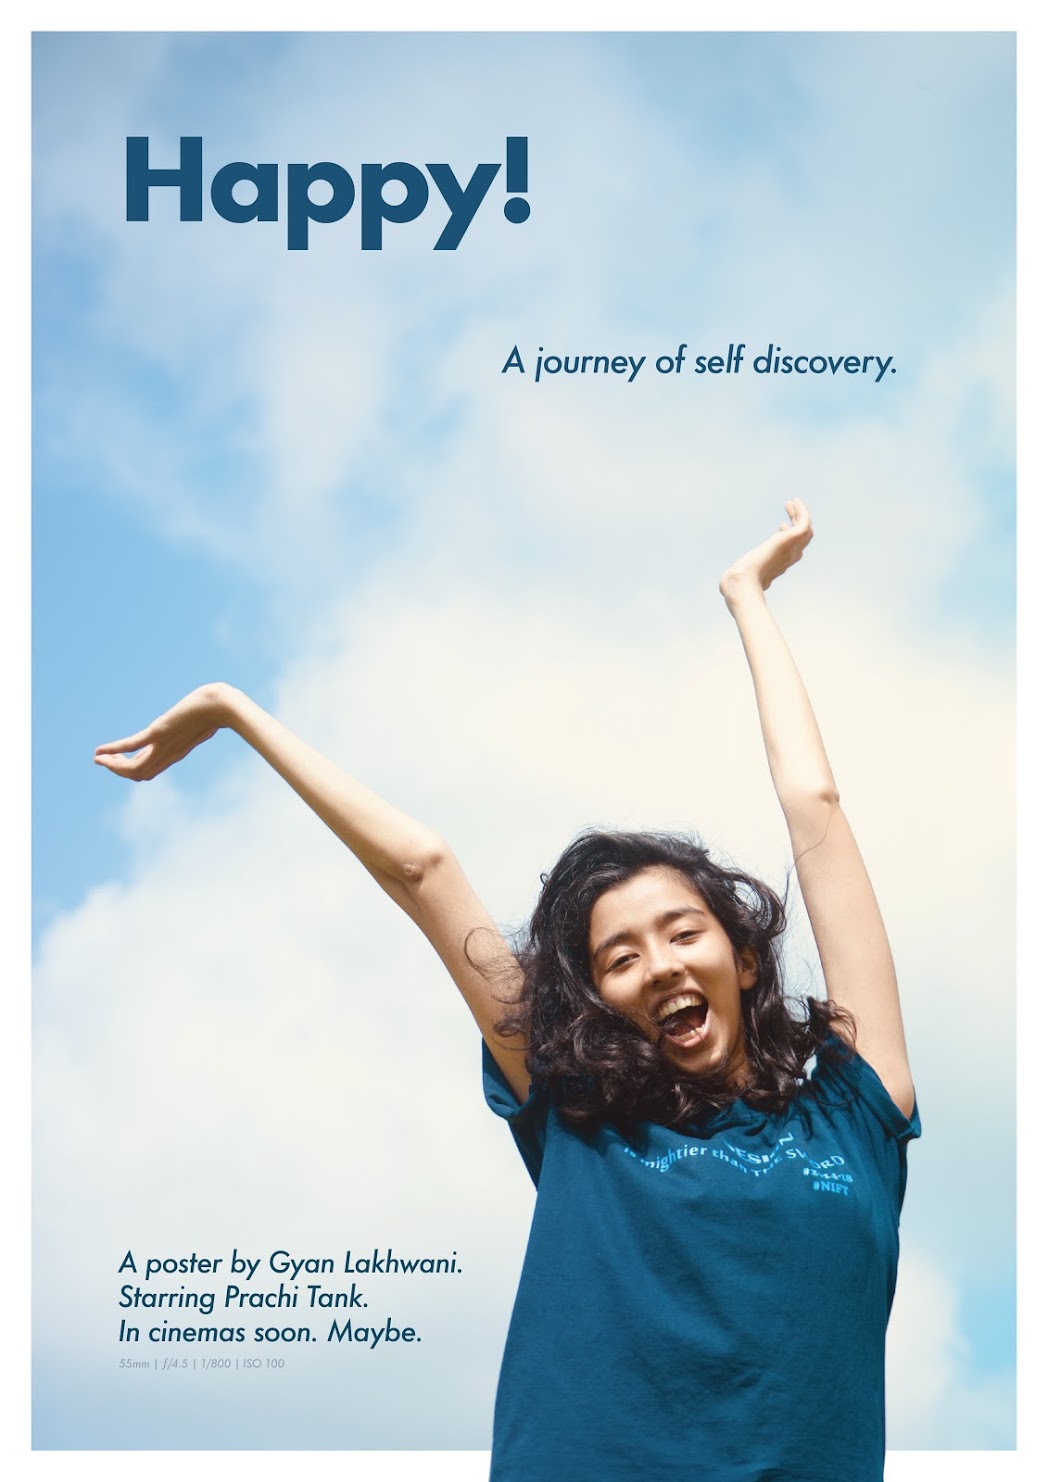 Movie poster titled "Happy, a journey of self discovery."